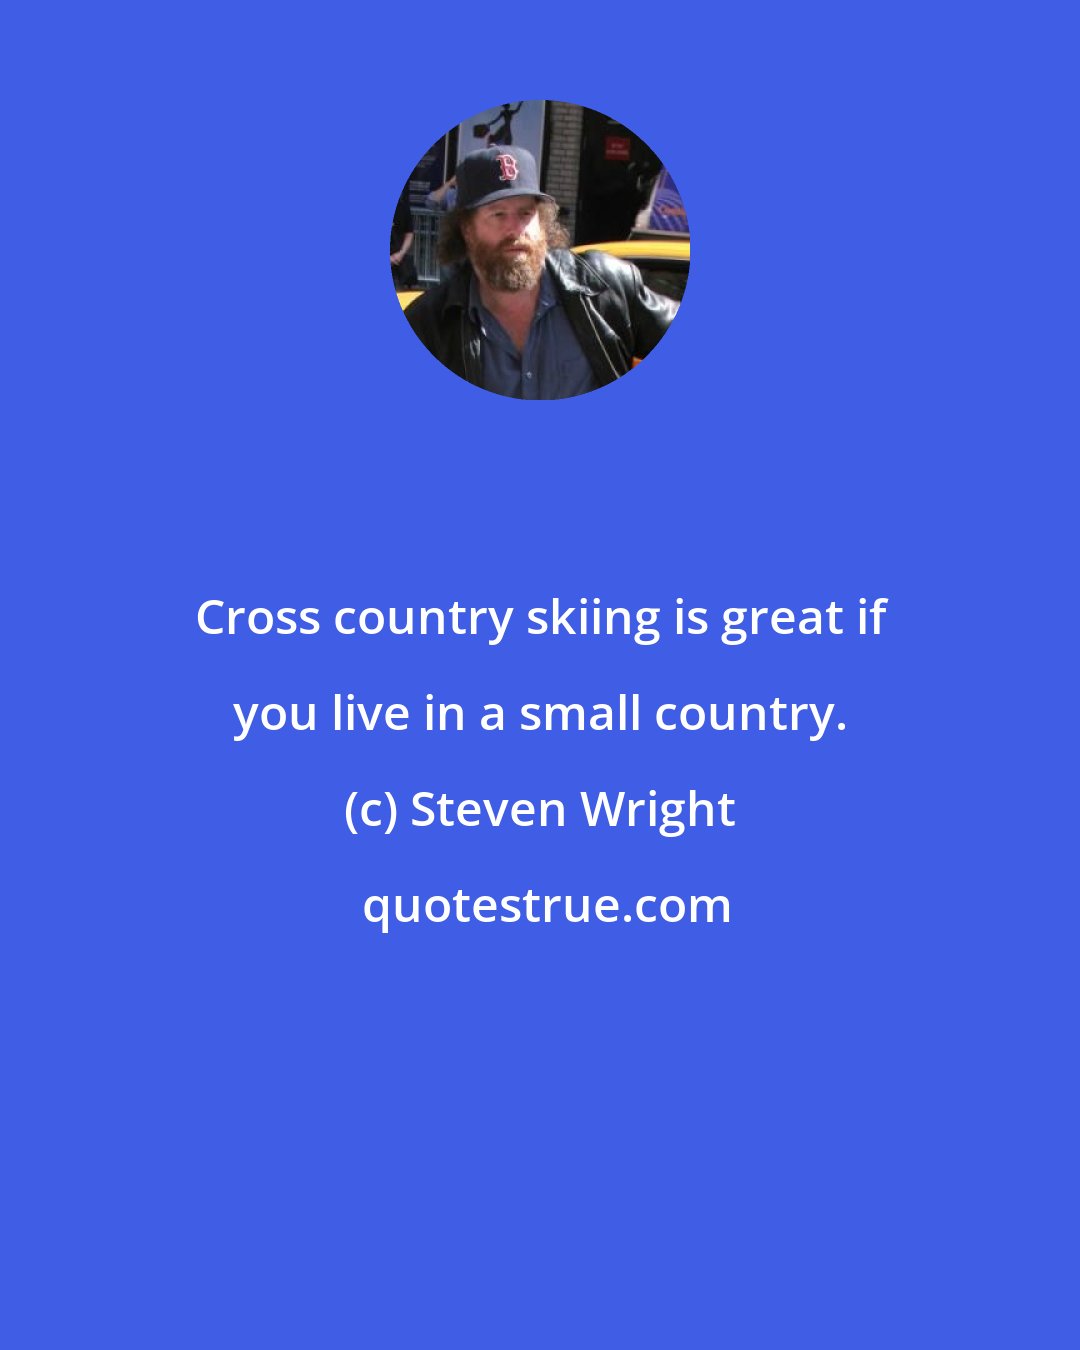 Steven Wright: Cross country skiing is great if you live in a small country.